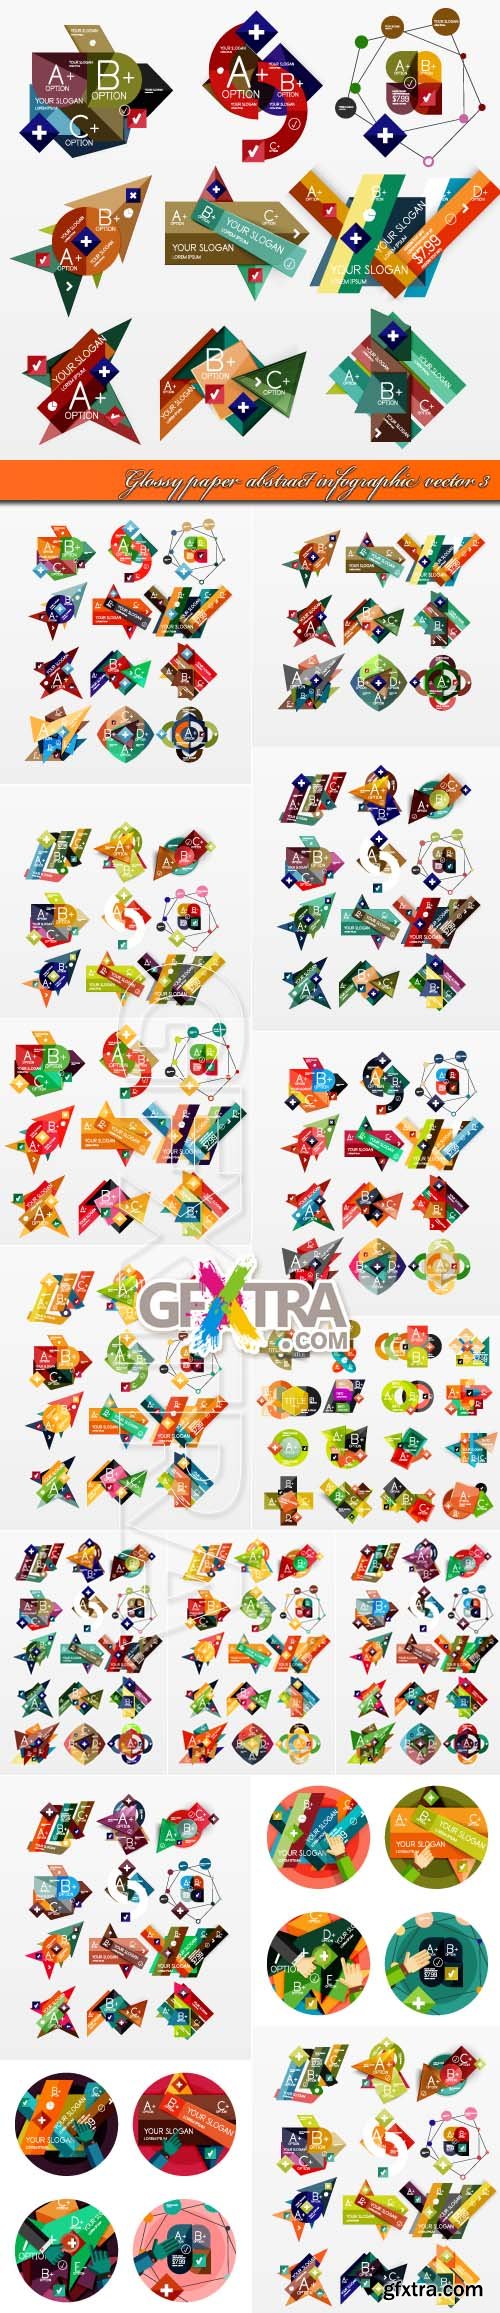 Glossy paper abstract infographic vector 3